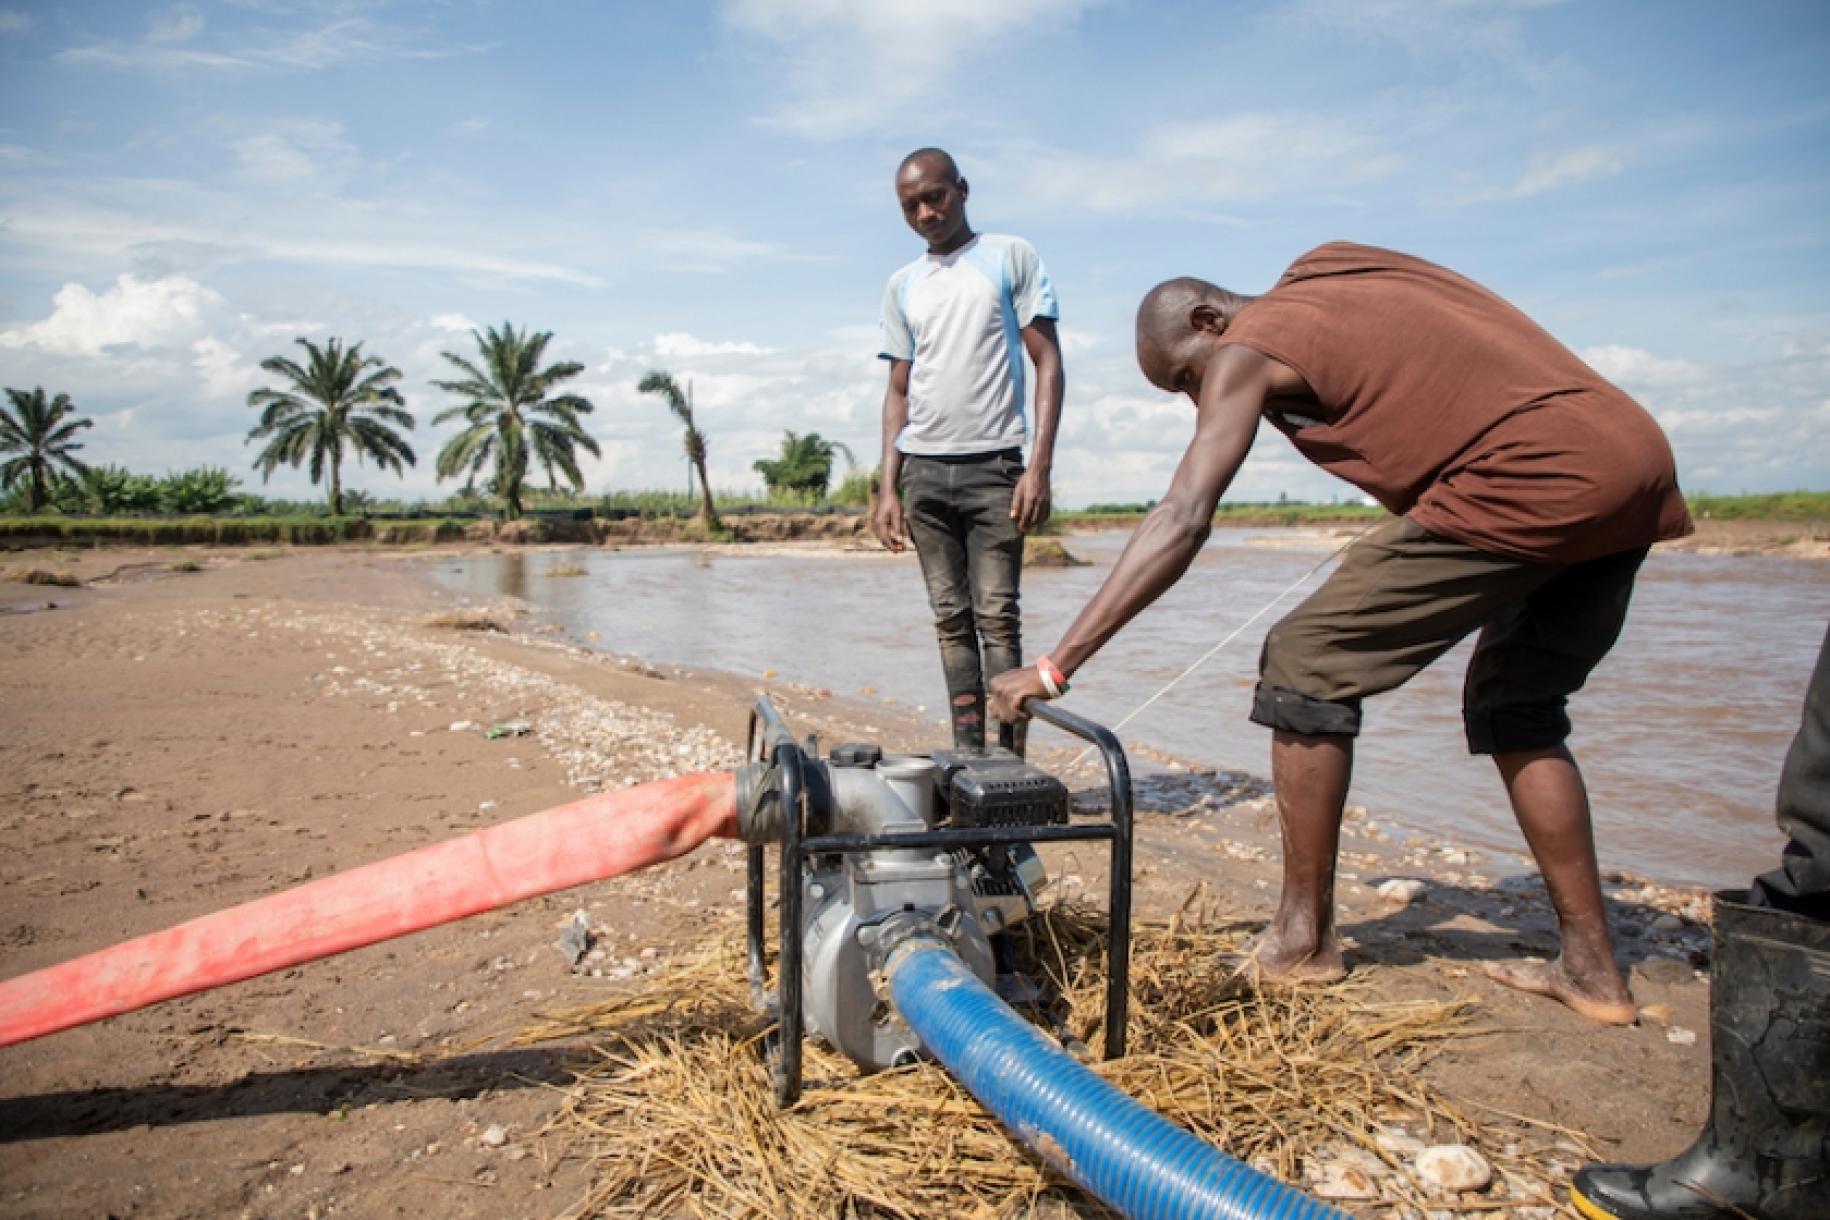 In Burundi, near a pond lined with palm trees, a man leans over the motor of a water collection system to make it work, while another man watches.